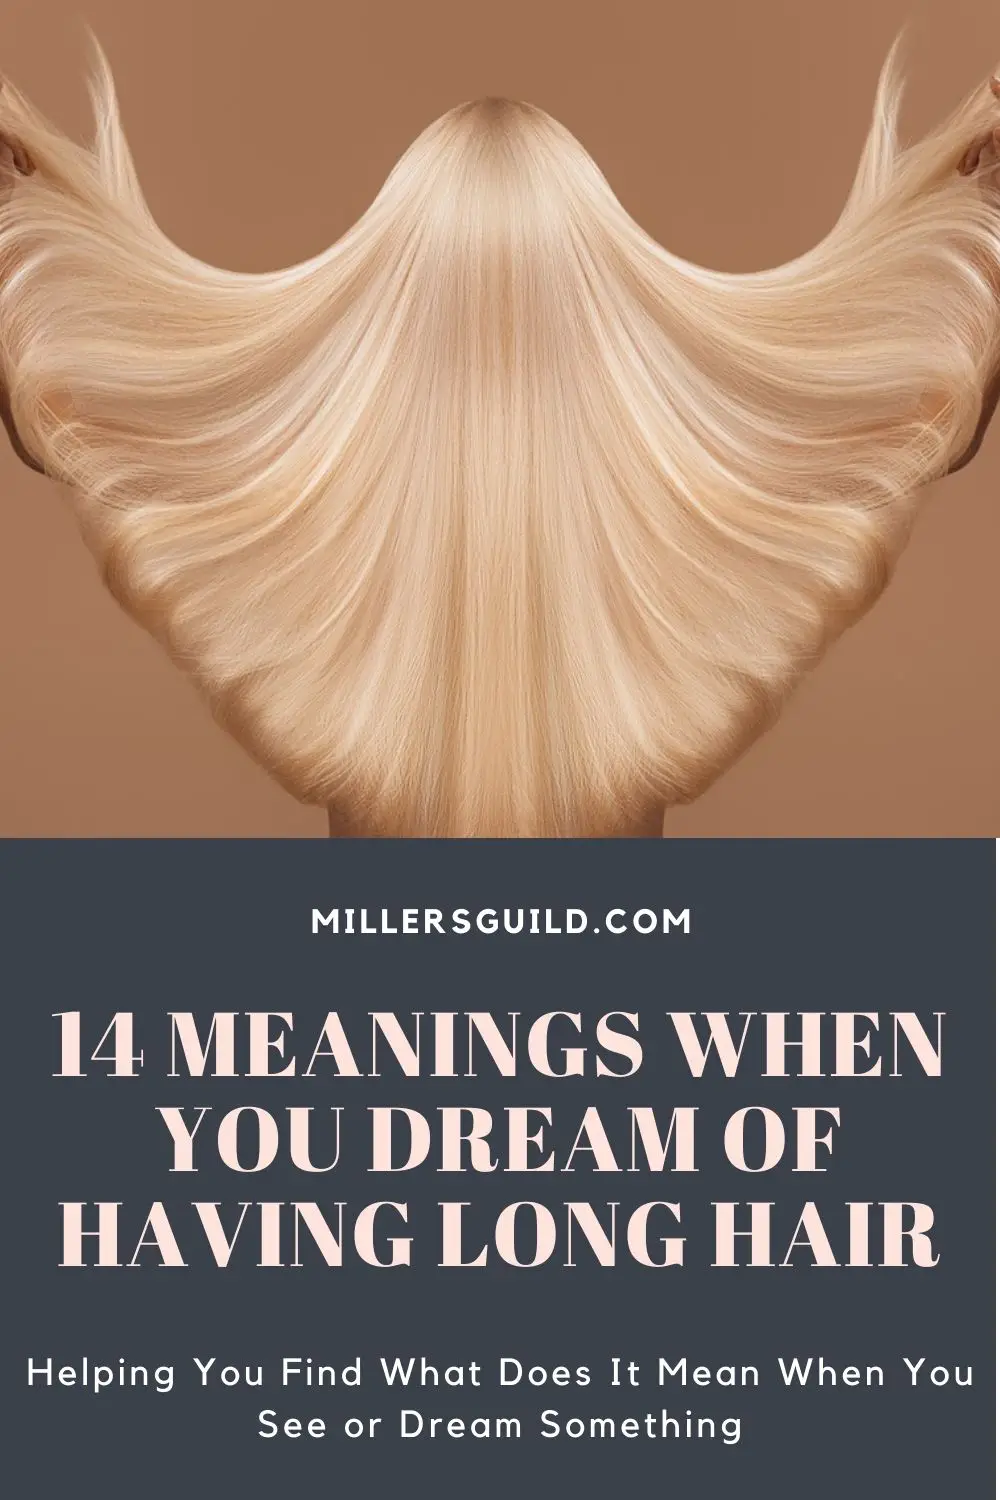 Spiritual Meaning Of Hair In Dreams